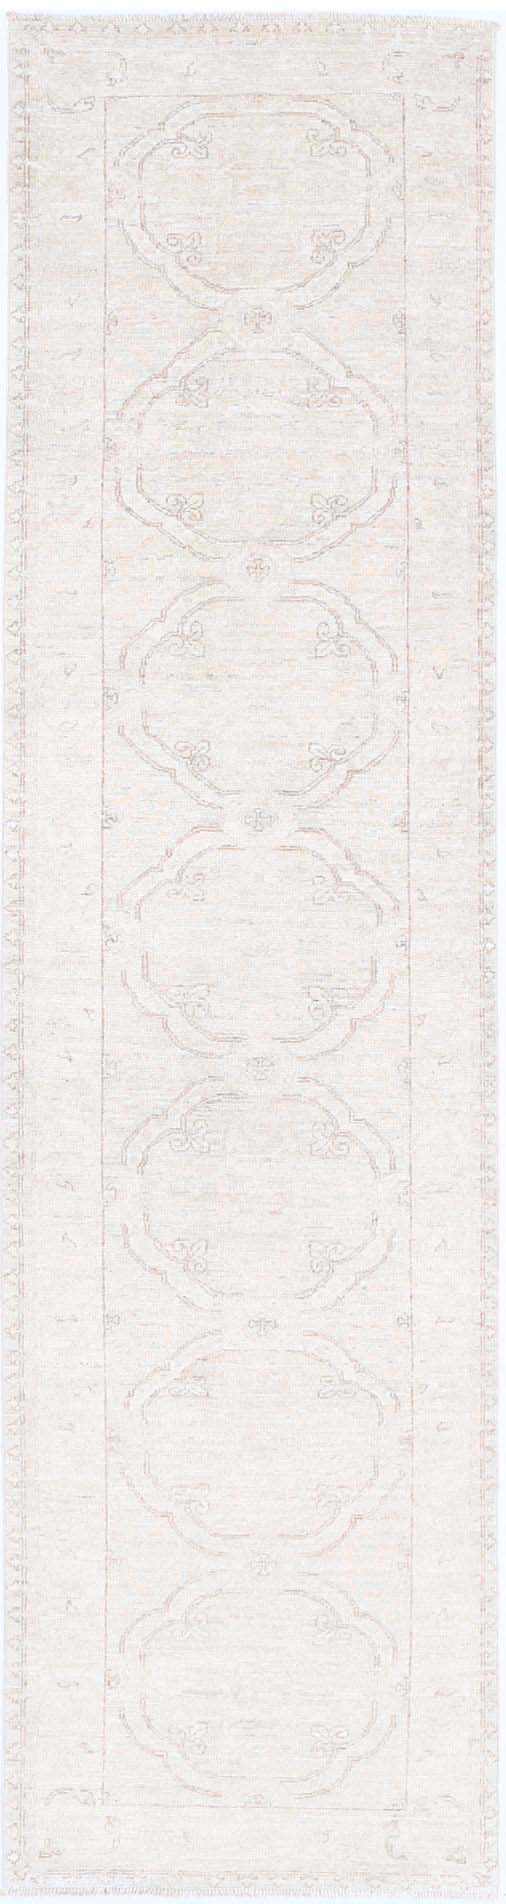 Hand Knotted Fine Serenity Wool Rug - 2'4'' x 10'2''